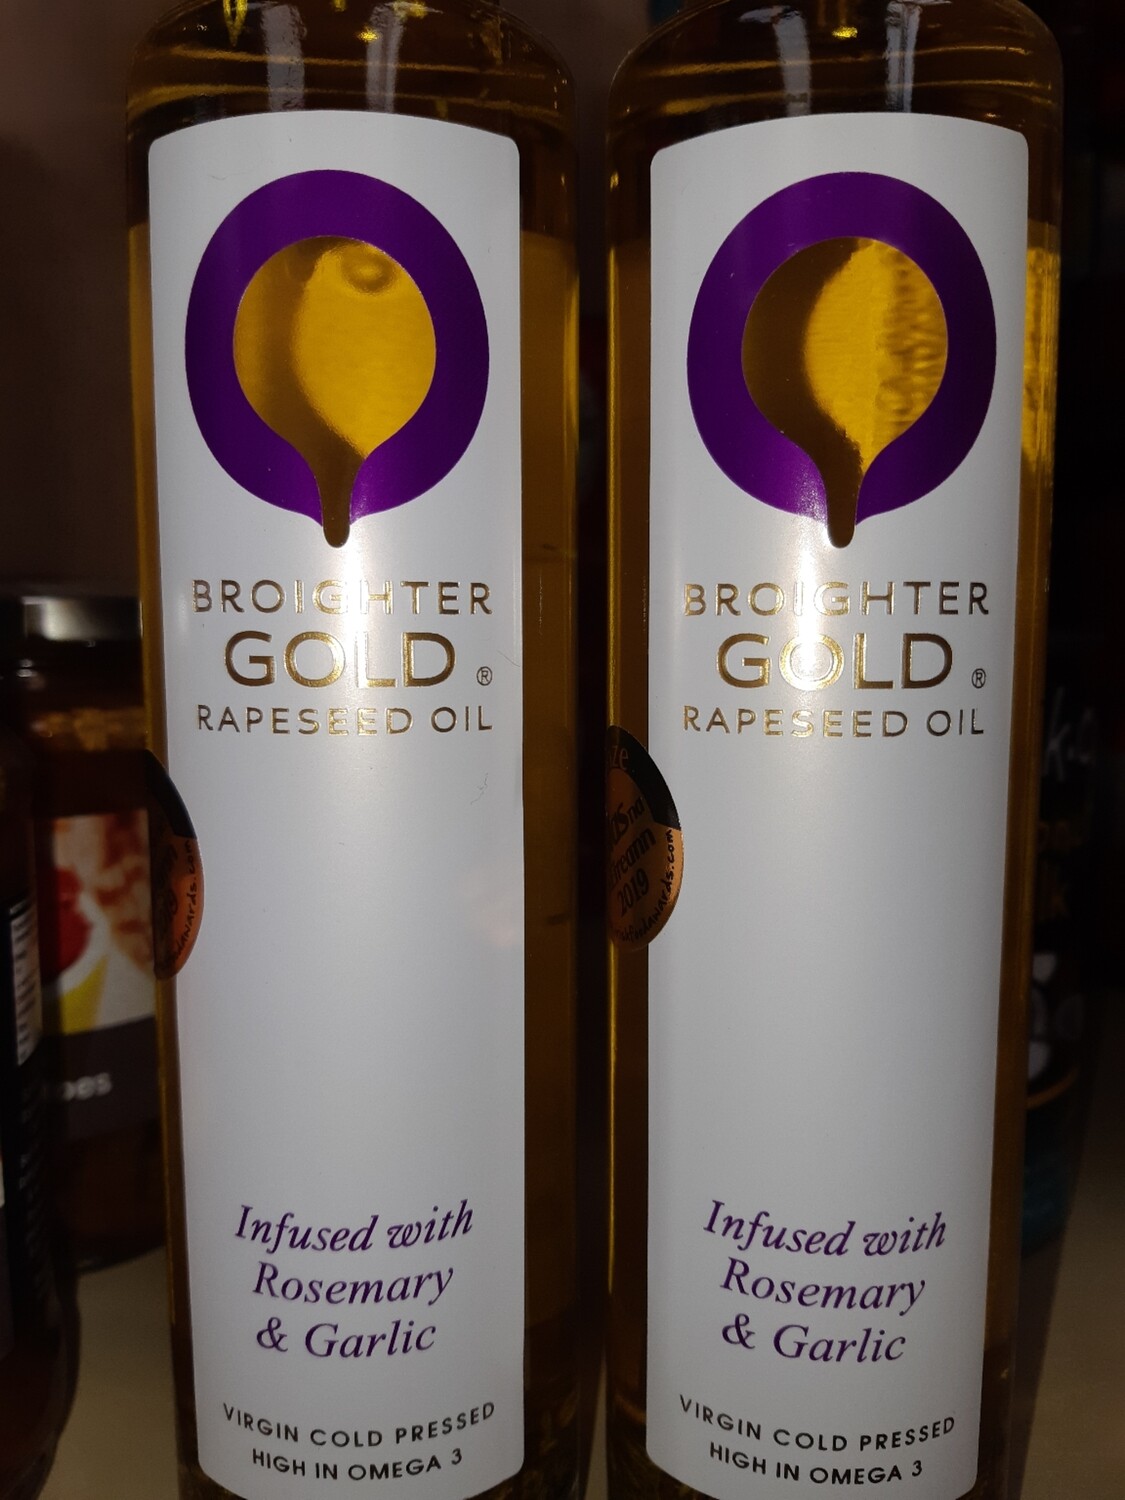 Z Local Rapeseed Oil infused with Rosemary & Garlic